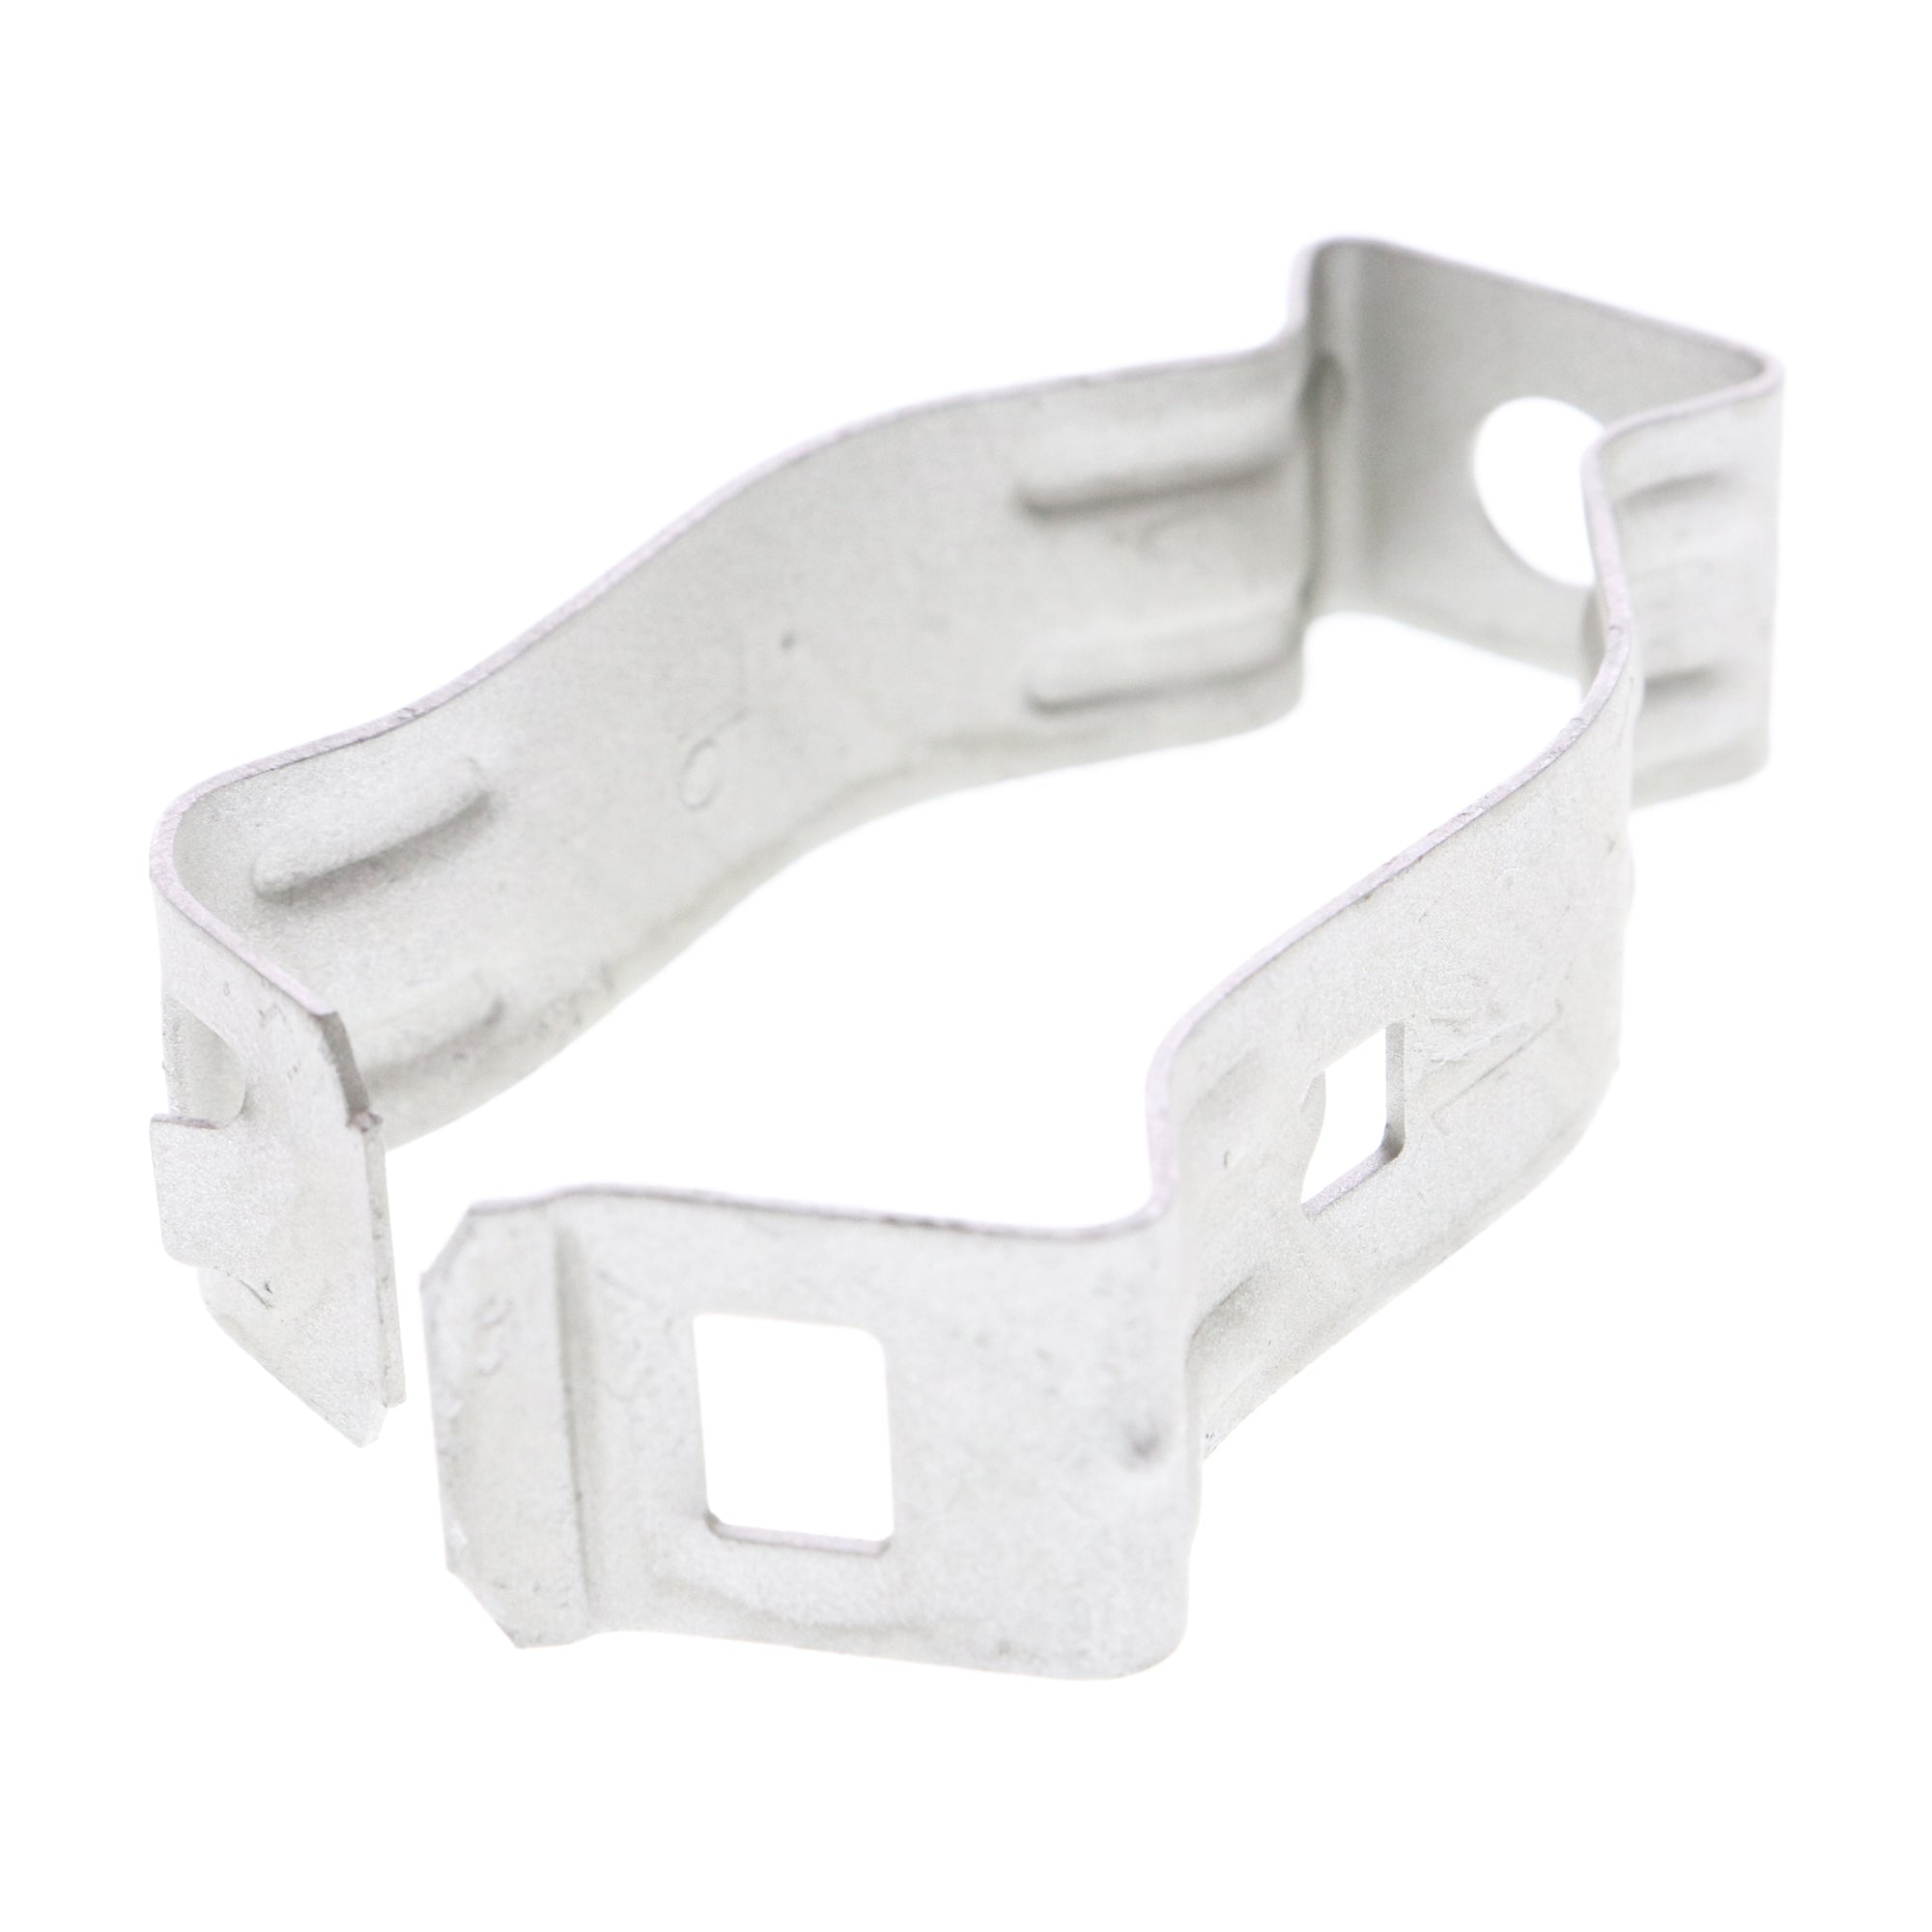 Erico Caddy Cadwal, CADDY ERICO 16M EMT OR RIGID SNAP-CLOSE CONDUIT/PIPE CLAMP, 1-INCH, (100-PACK)